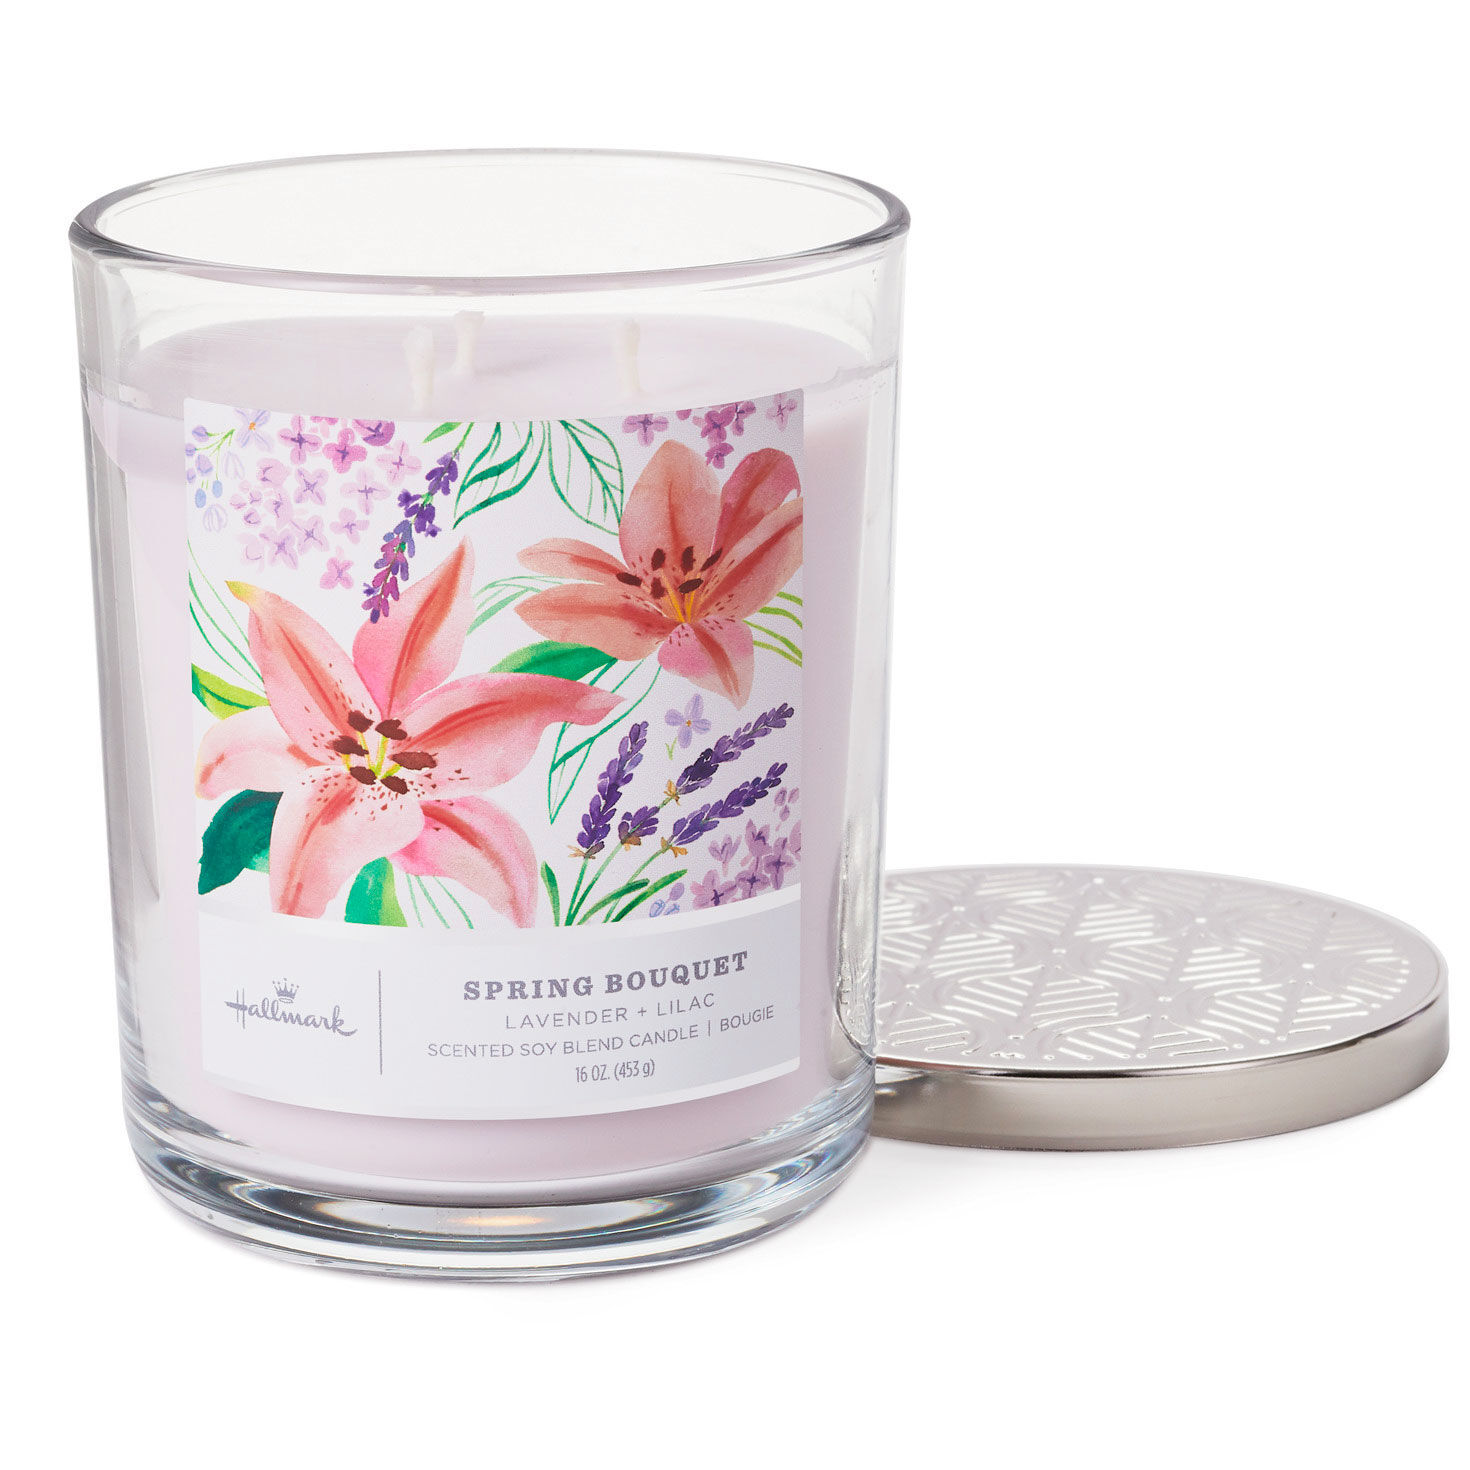 Spring Bouquet 3-Wick Jar Candle, 16 oz. for only USD 29.99 | Hallmark